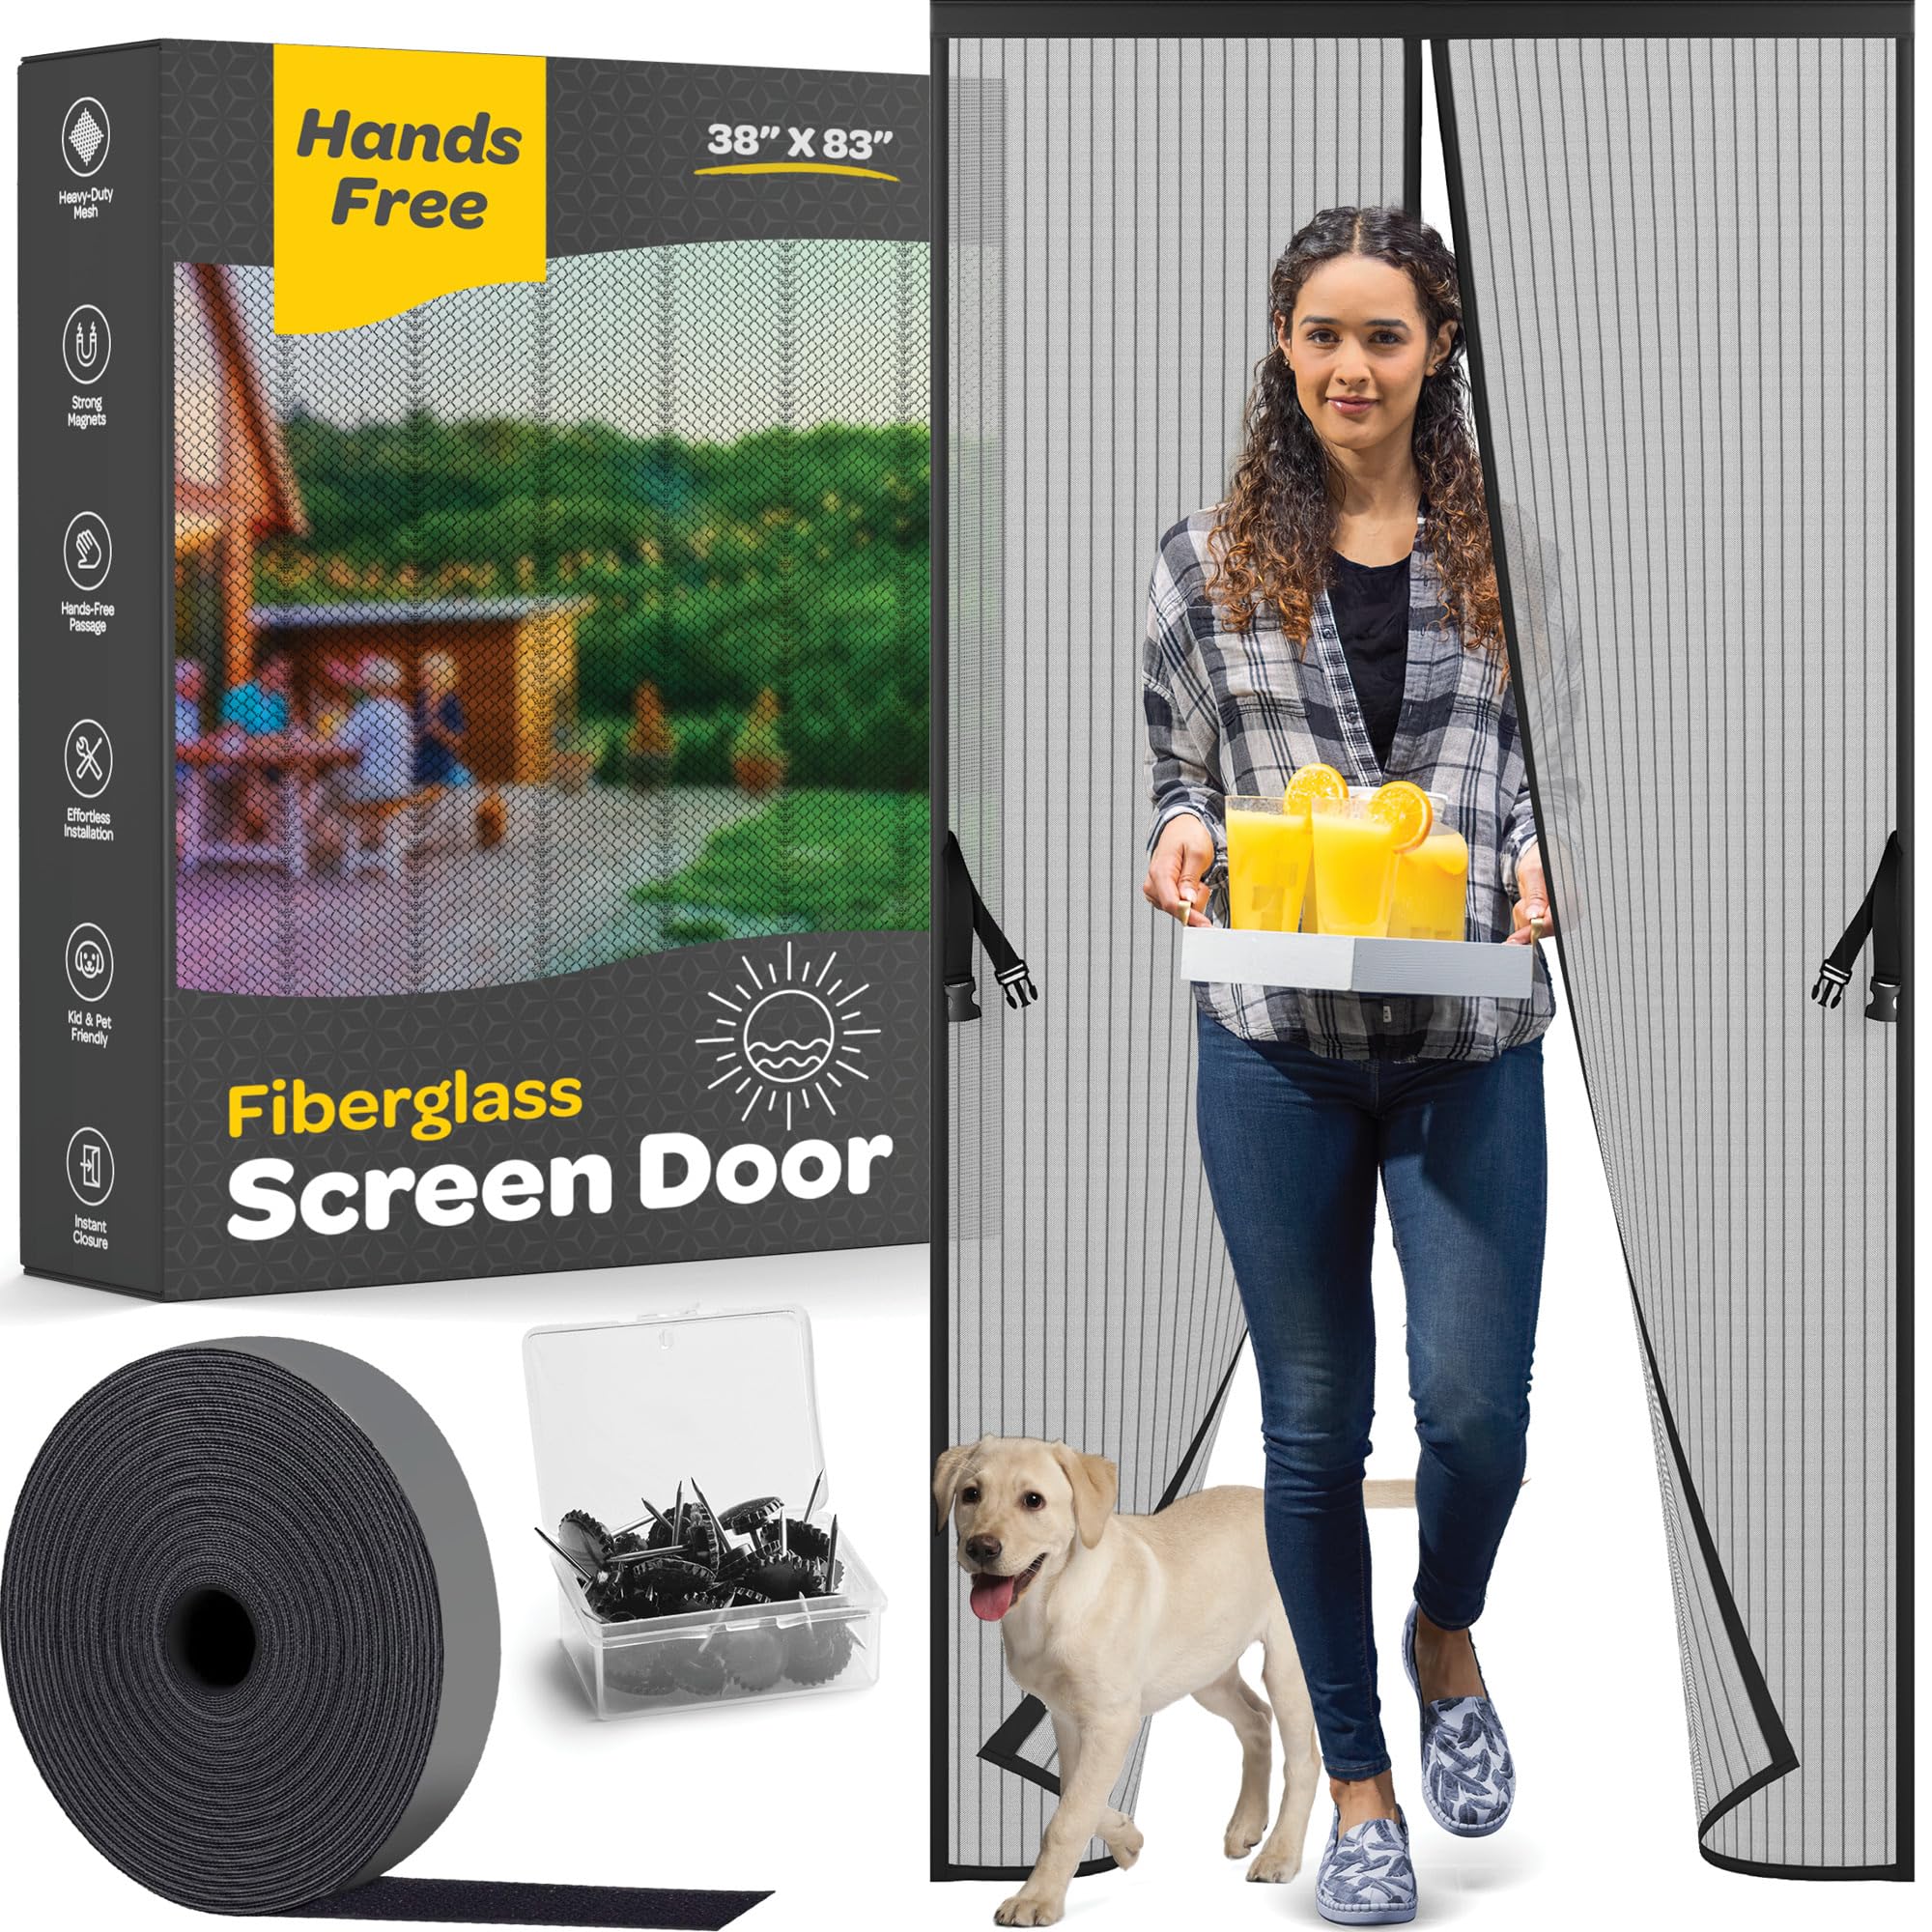 Hands-Free Magnetic Screen Door, Heavy Duty, Self Sealing Screen Door Mesh Protector, Pet and Kid-Friendly, Stay-Open Buckle, Fits Door Size (38" x 83") Keeps Bugs Out While…  - Like New